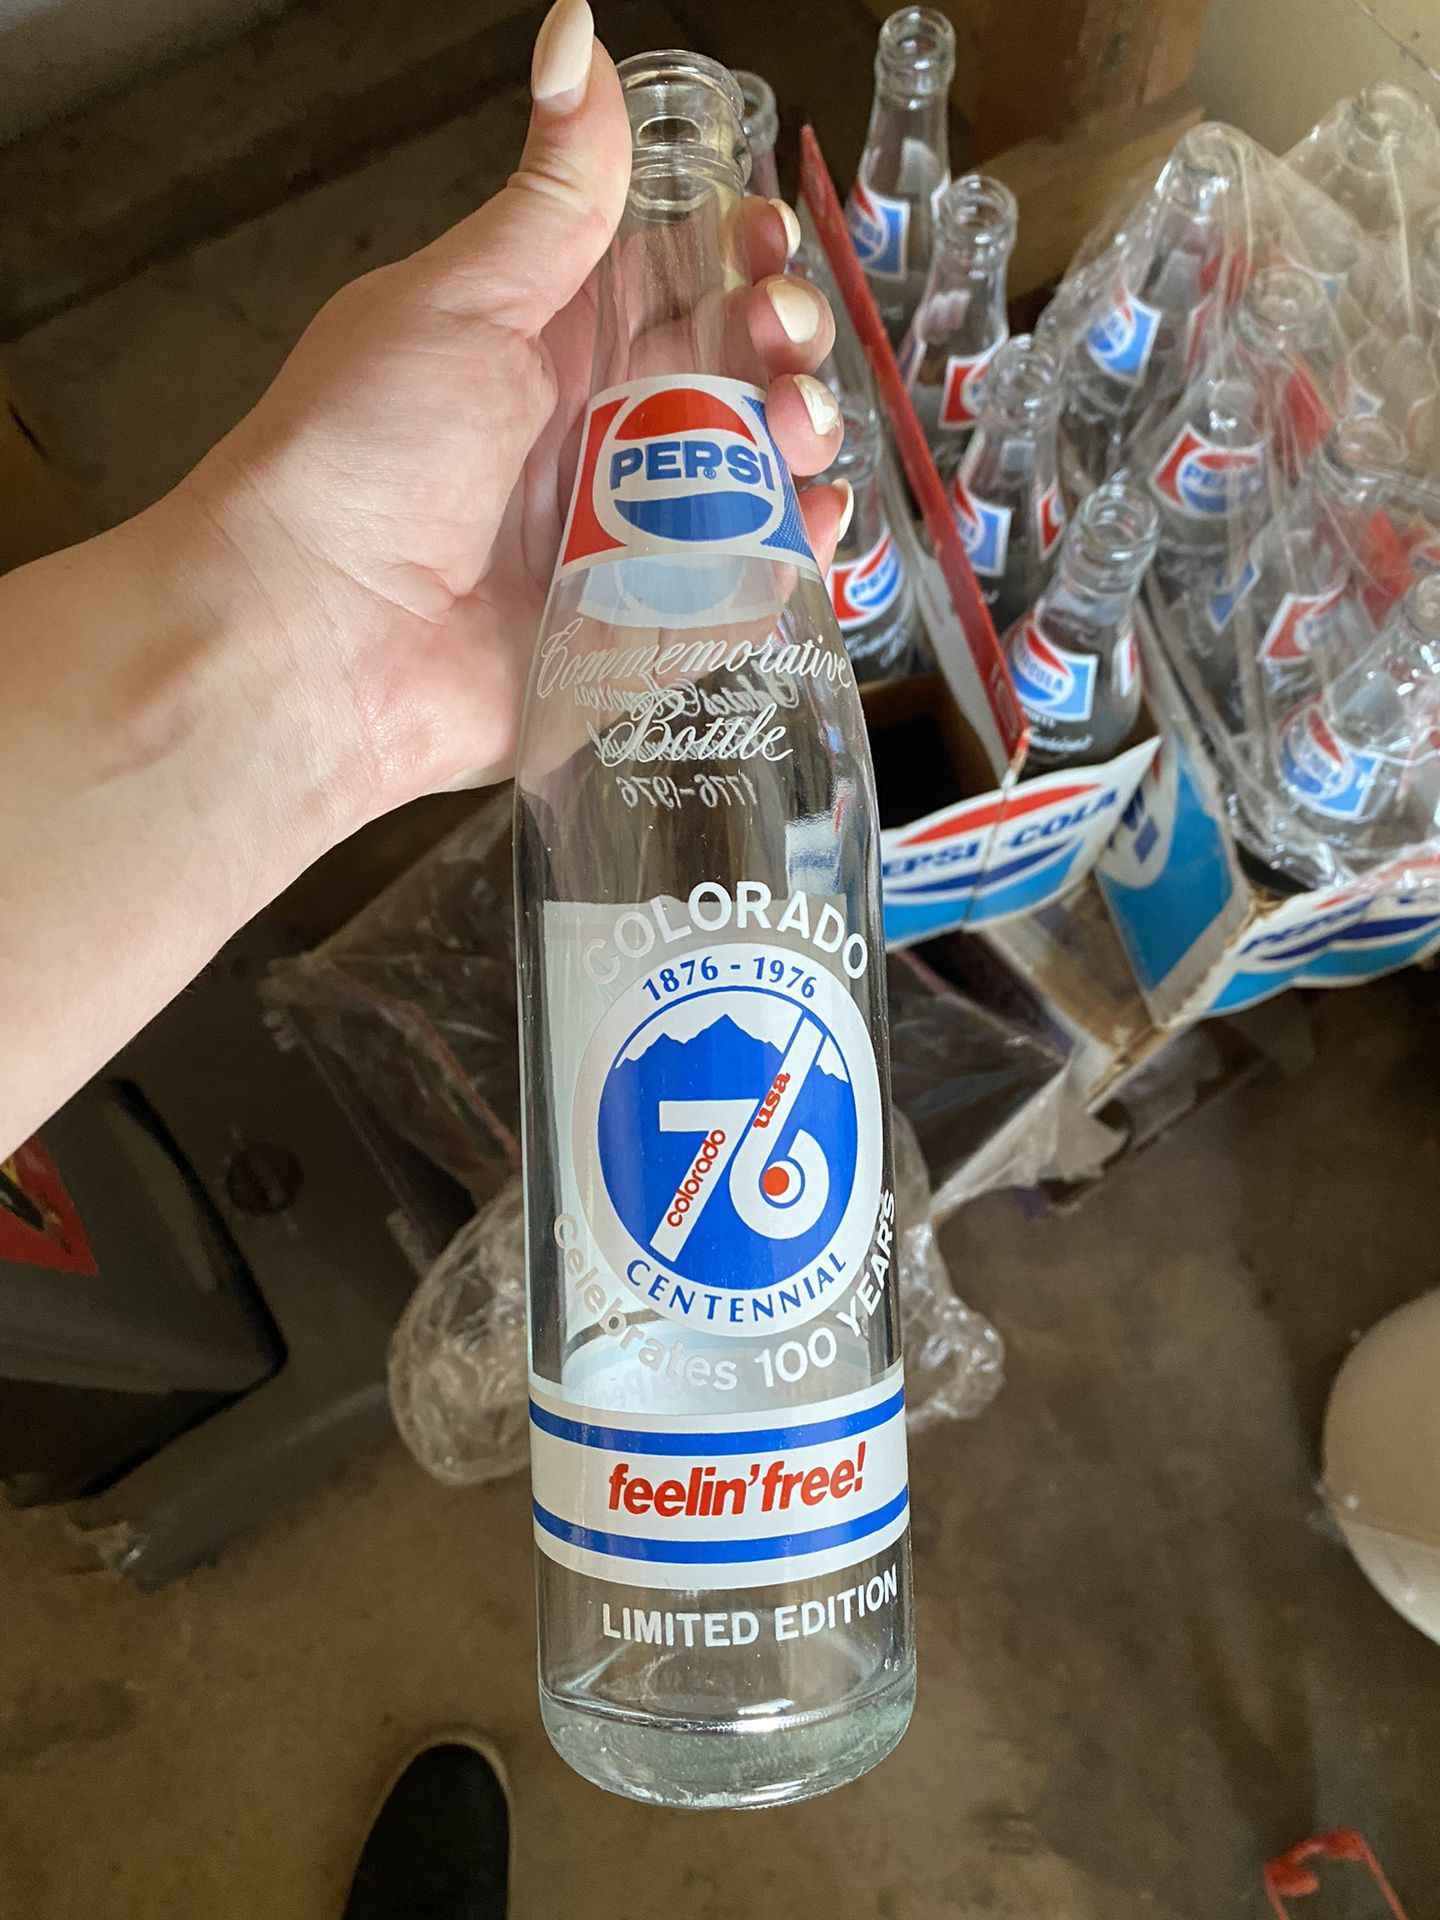 State of Colorado Centennial 100 years Commemorative Pepsi bottle 1(contact info removed)